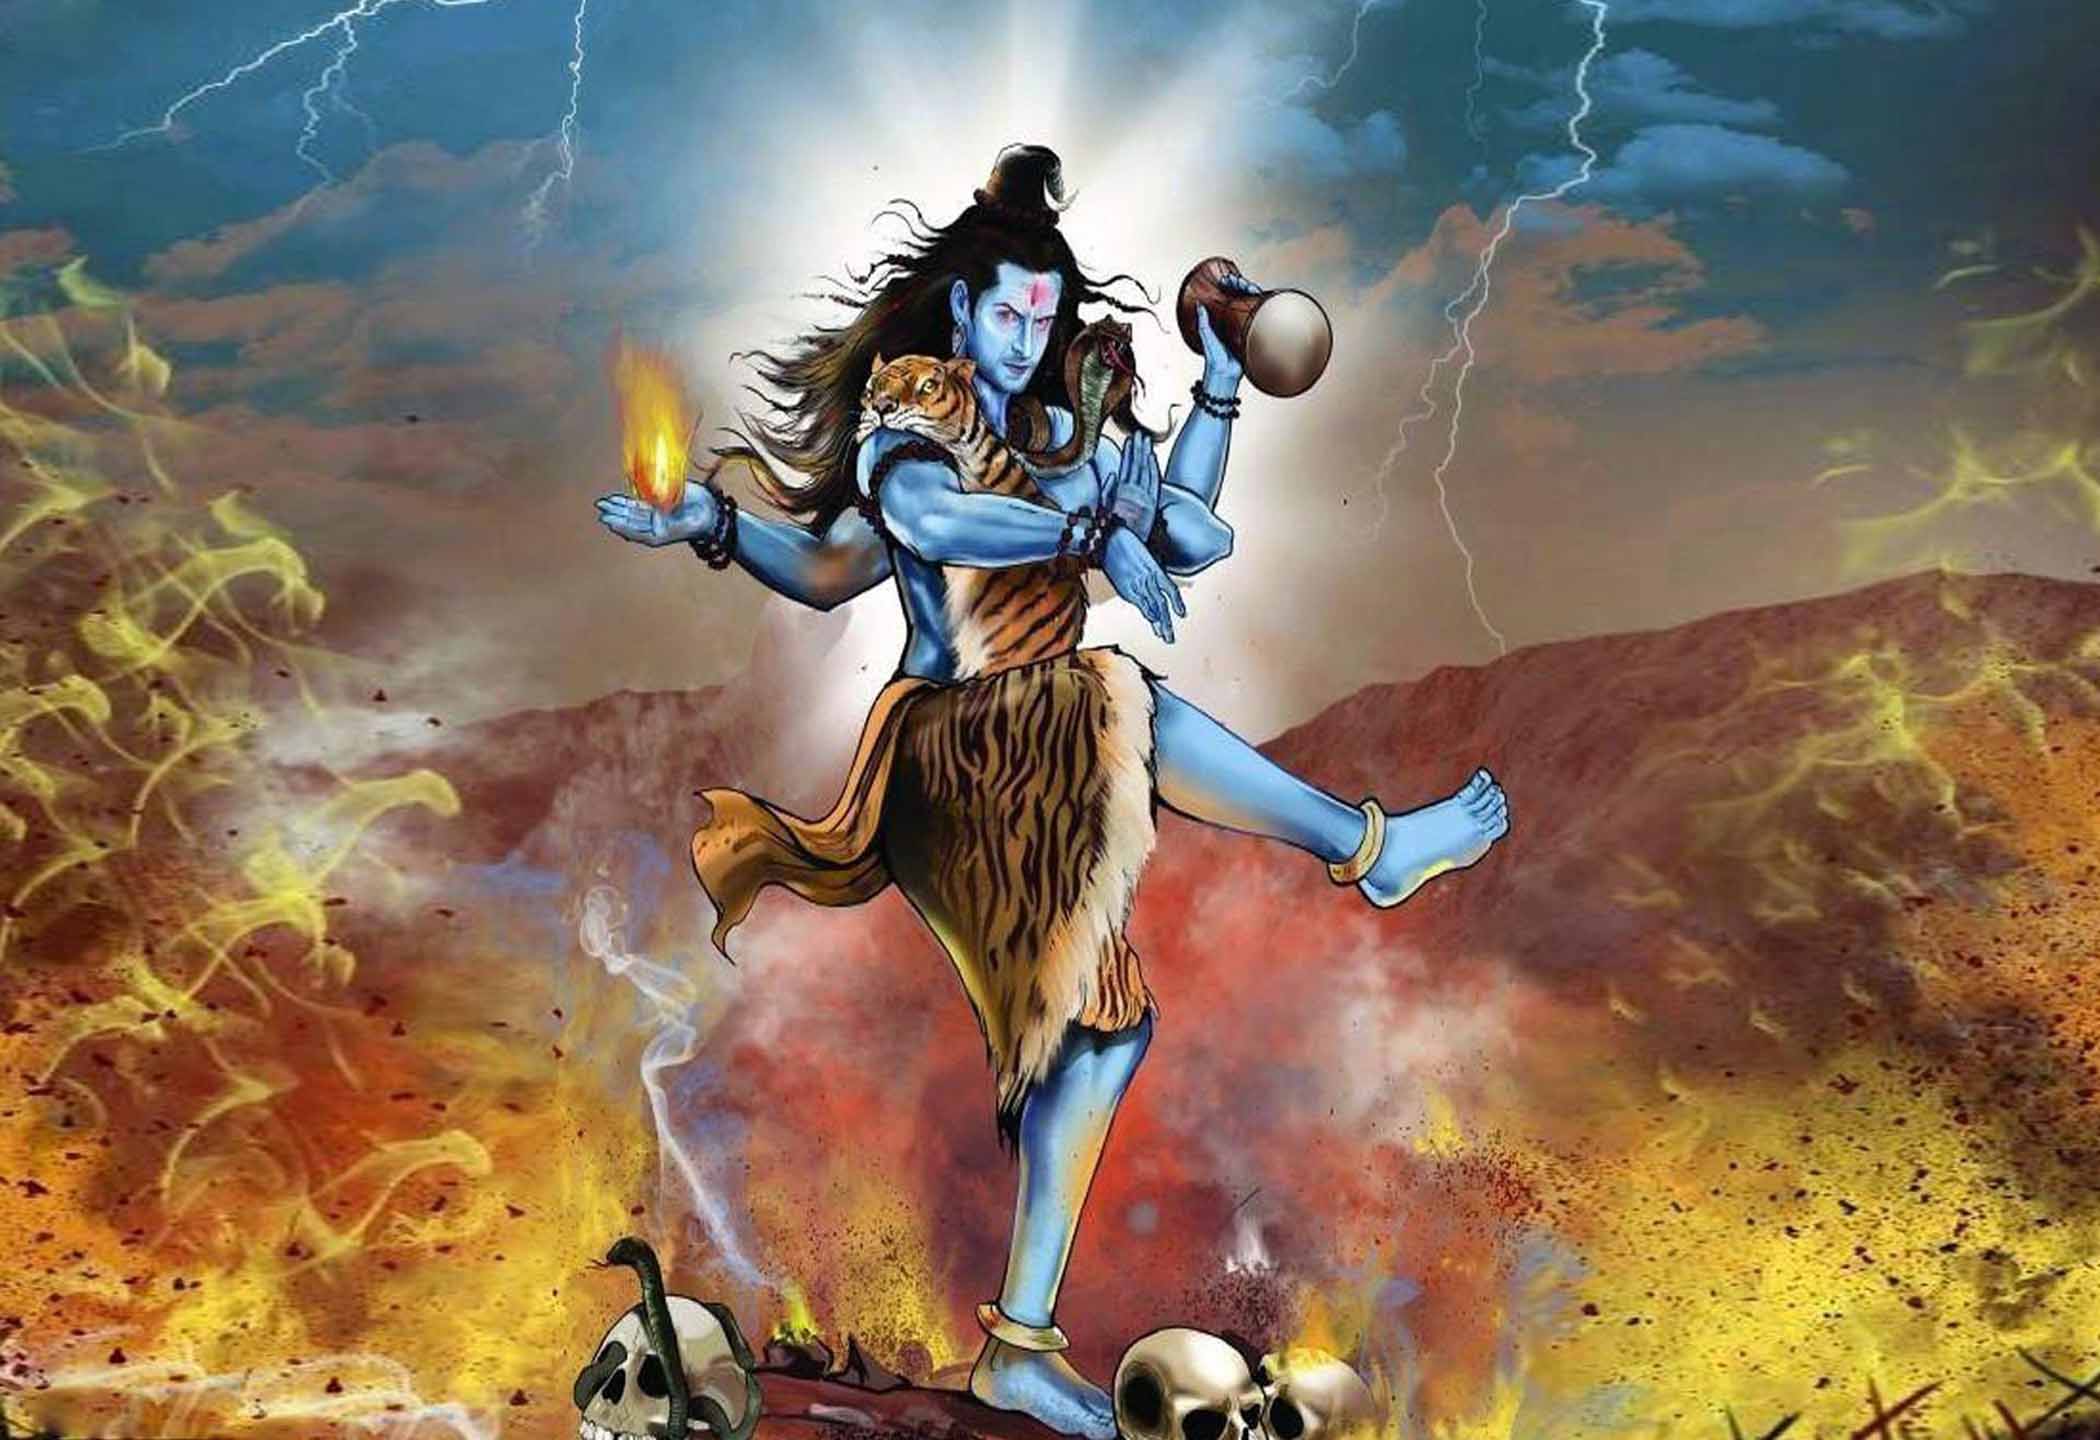 Lord Shiva Angry HD Wallpaper 1080p For Desktop